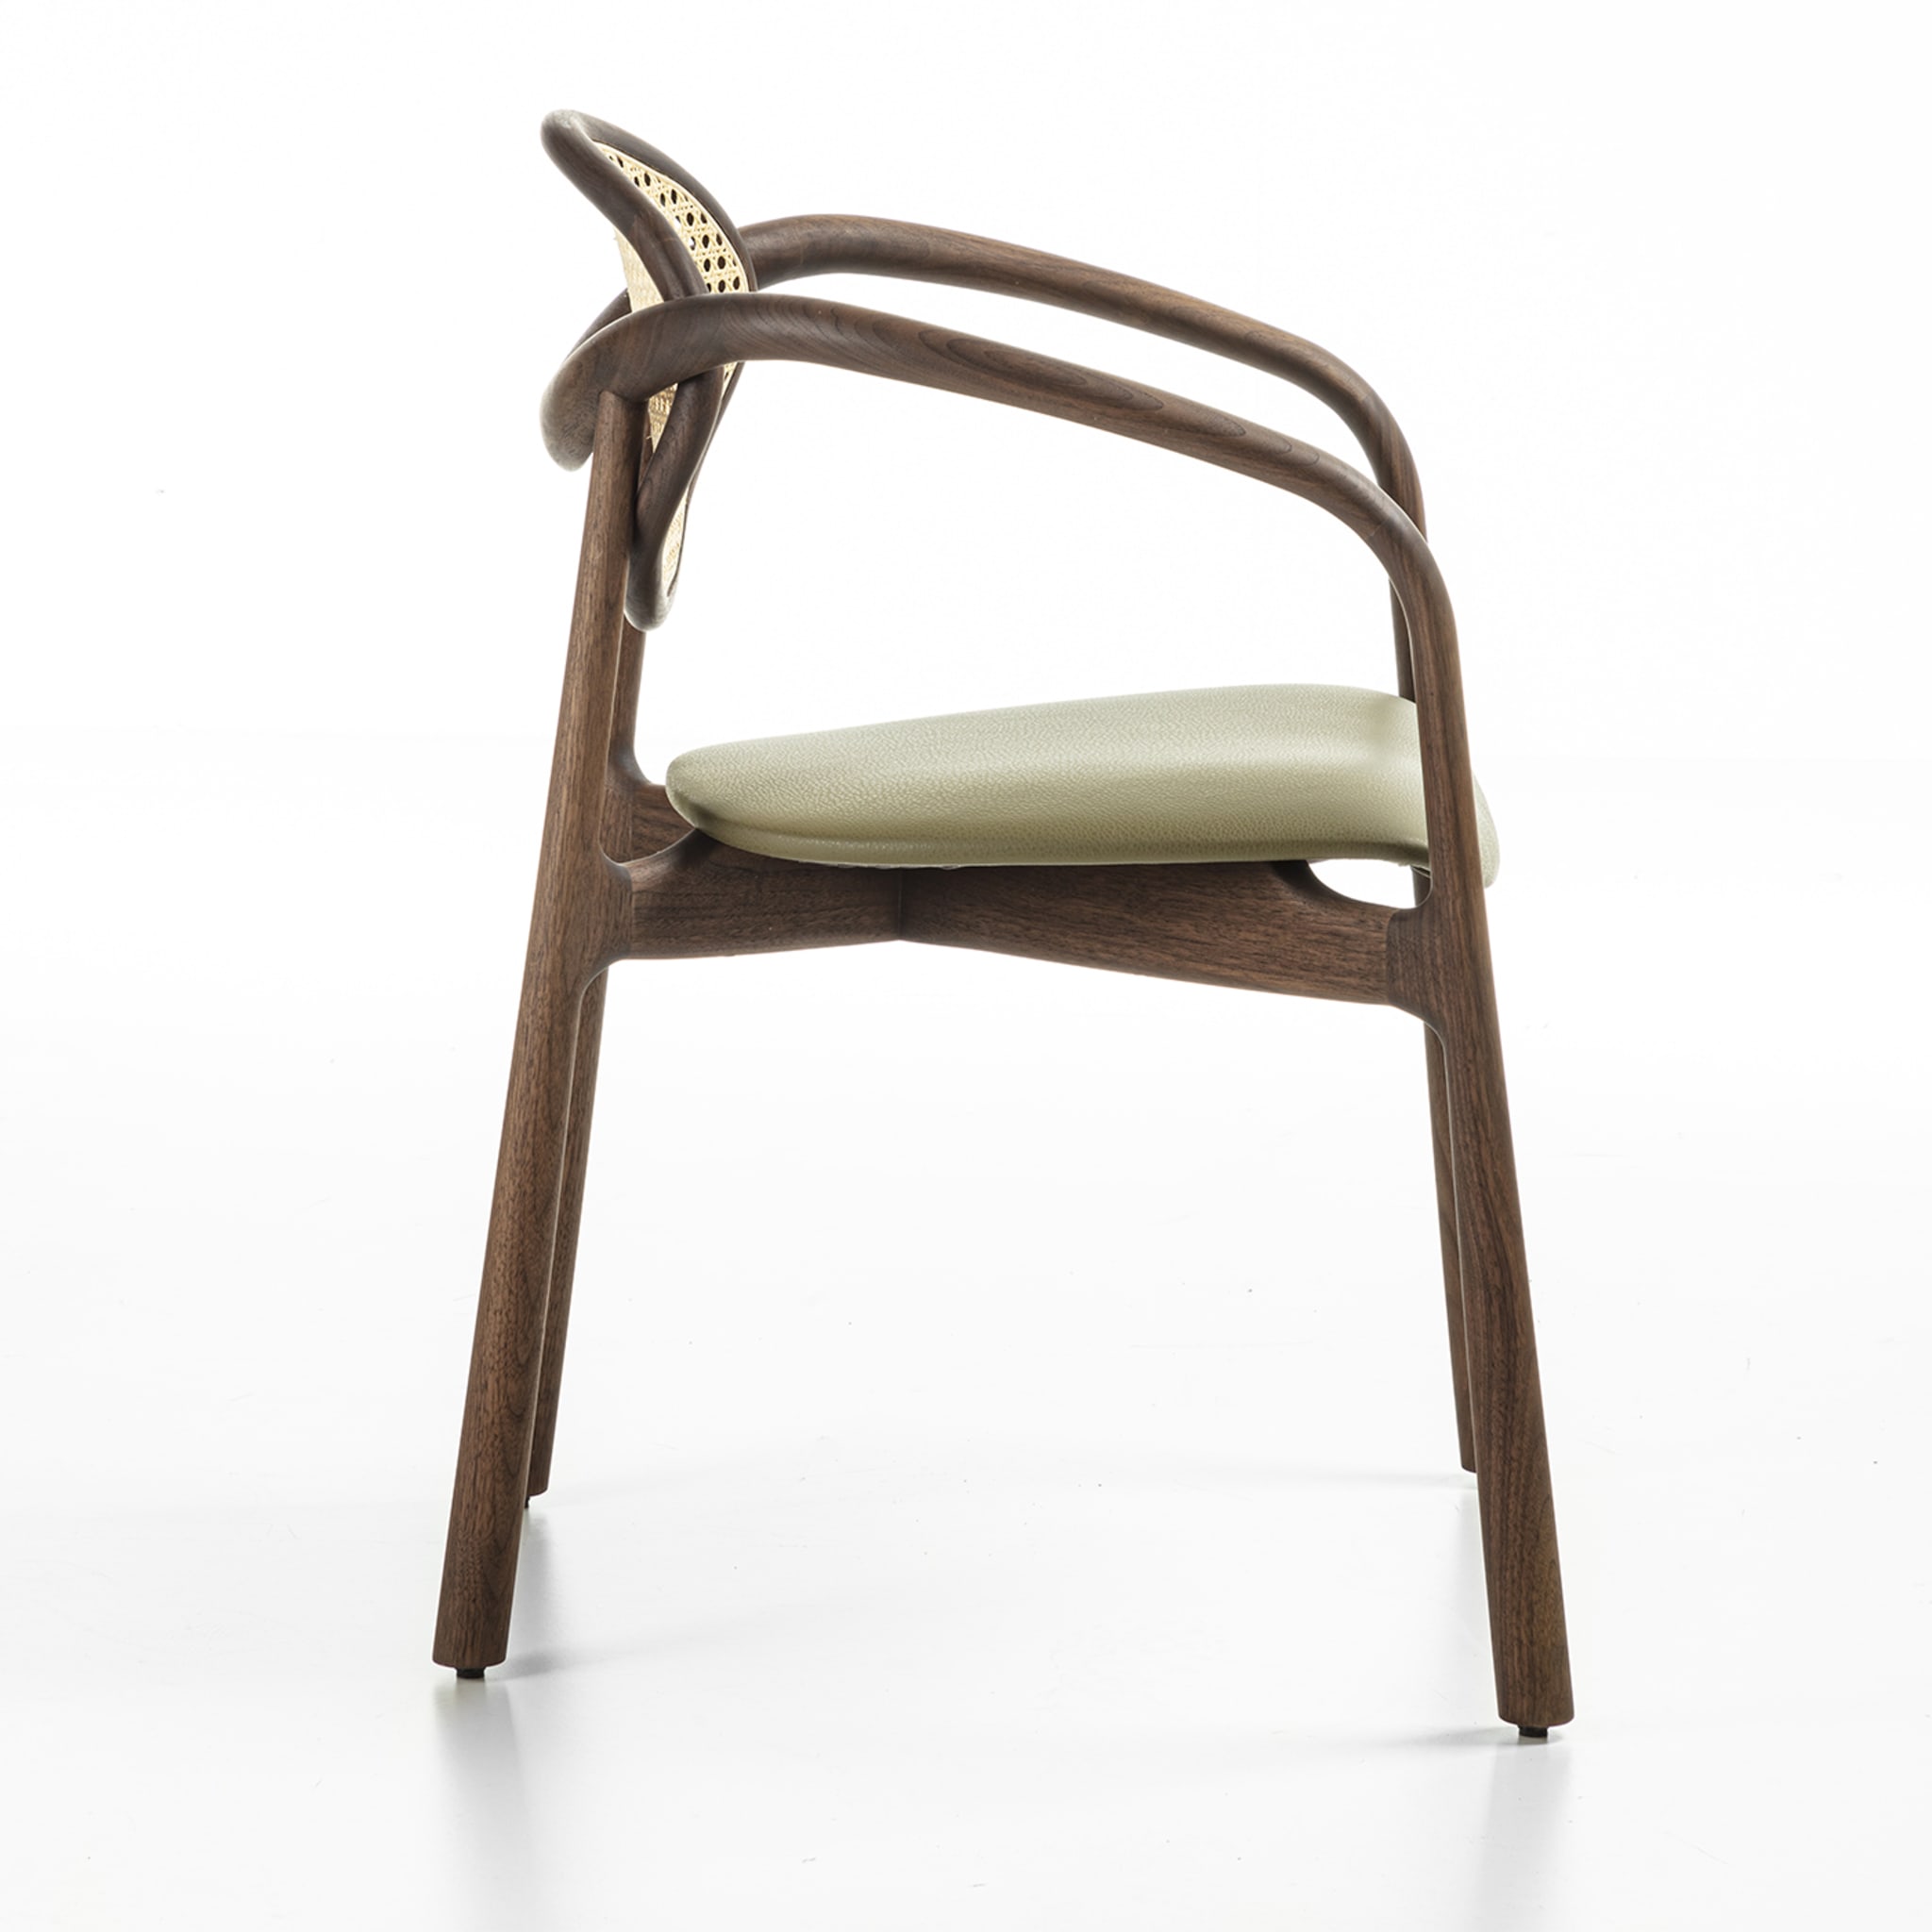 Marlena Green Chair With Arms by Studio Nove.3 - Alternative view 4